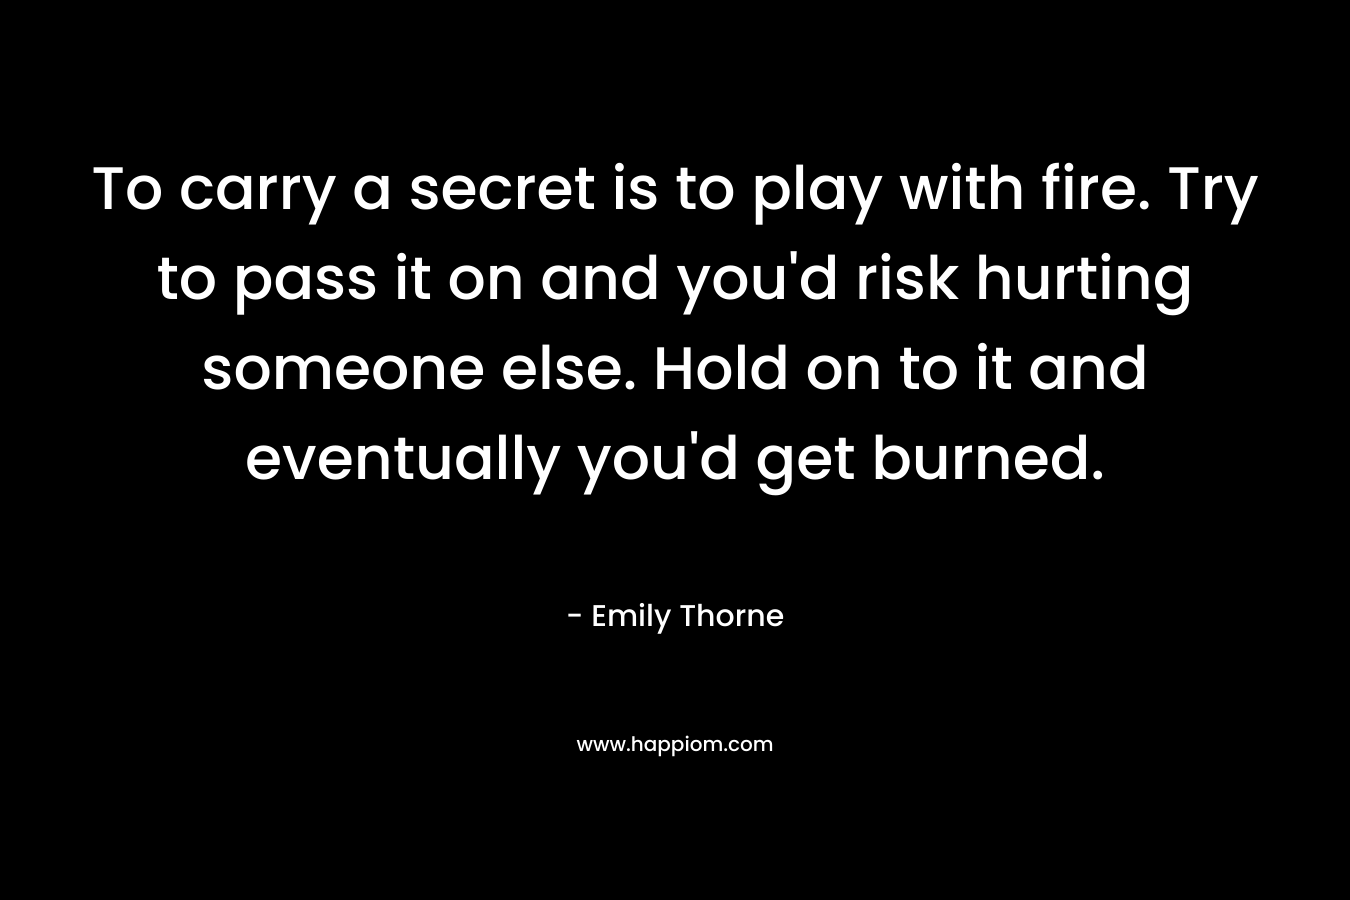 To carry a secret is to play with fire. Try to pass it on and you’d risk hurting someone else. Hold on to it and eventually you’d get burned. – Emily Thorne